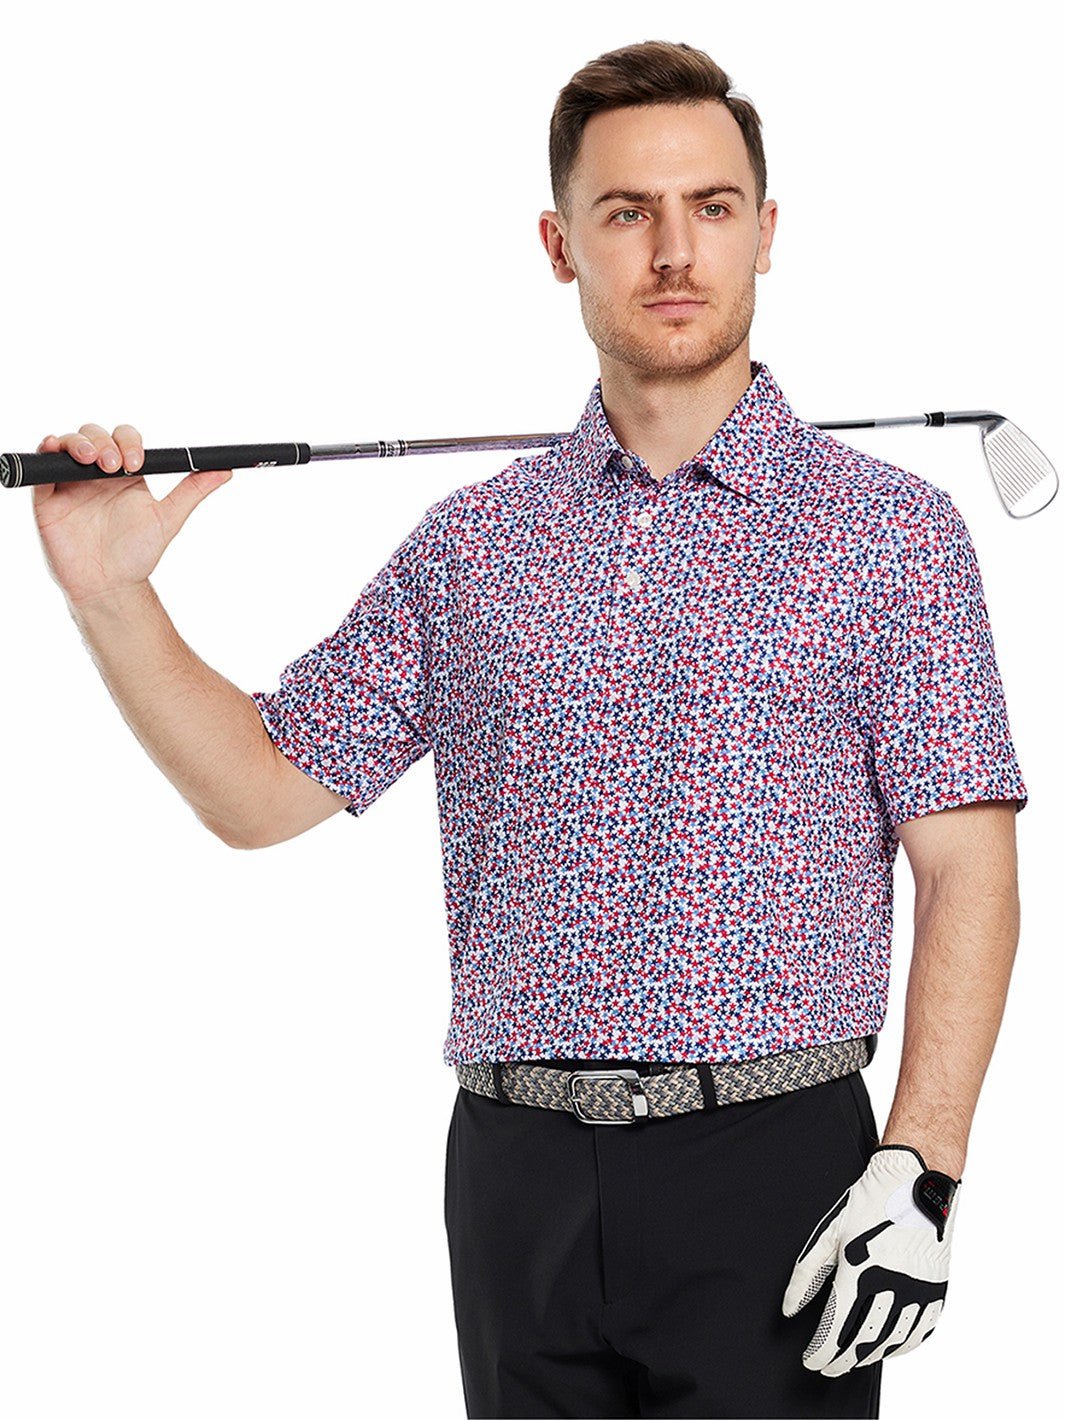 Men's Printed Dry Fit Moisture Wicking Lightweight Golf Polo Shirts ...